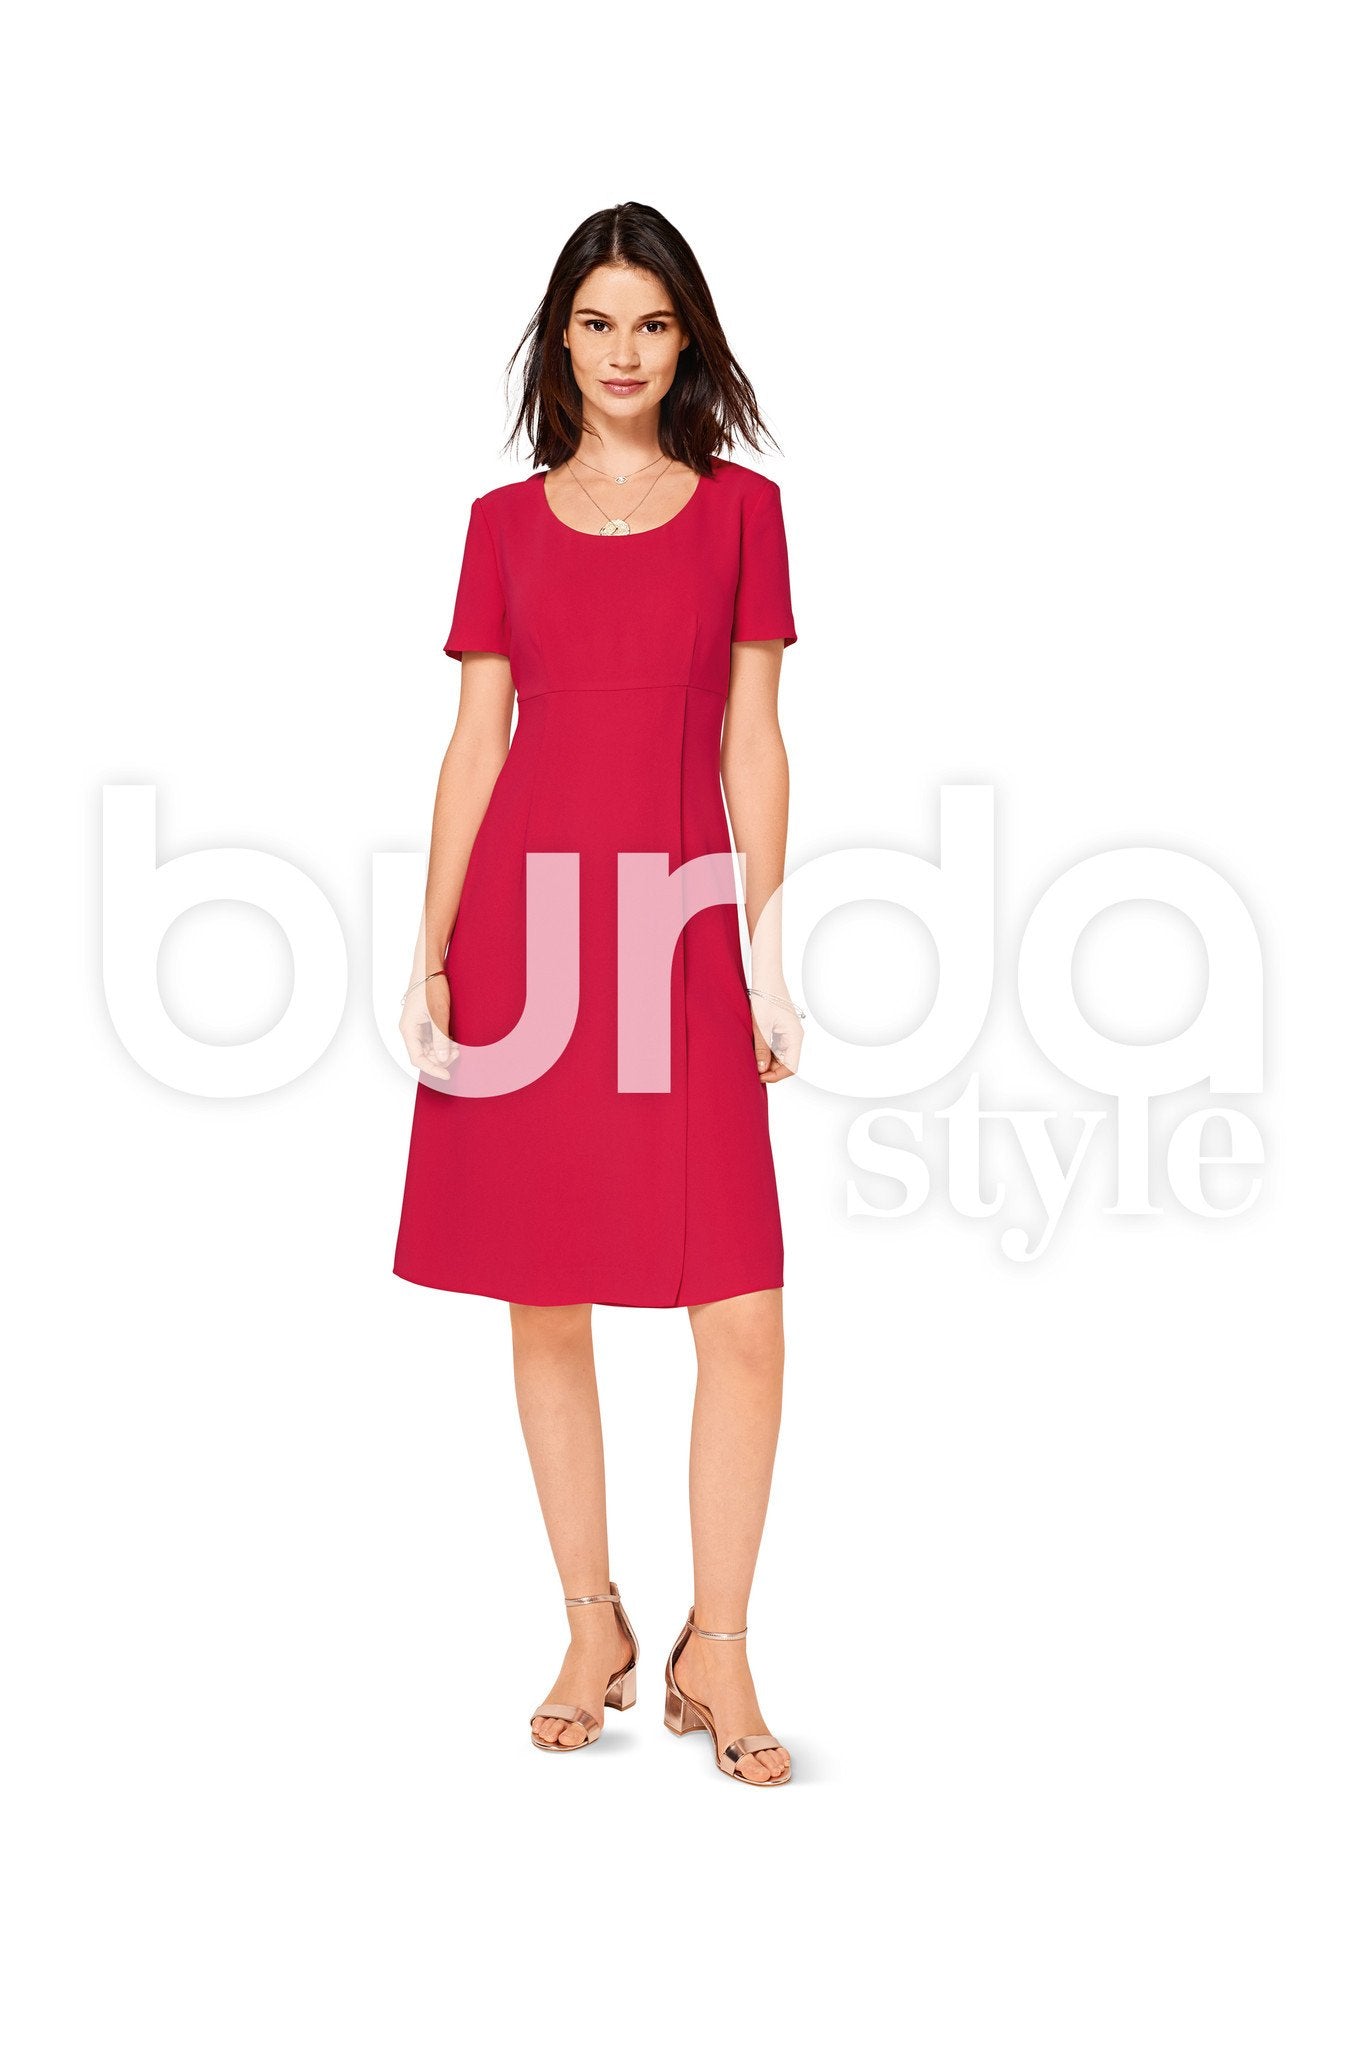 Burda Style Pattern BD6496 Misses' High Waist Dress from Jaycotts Sewing Supplies